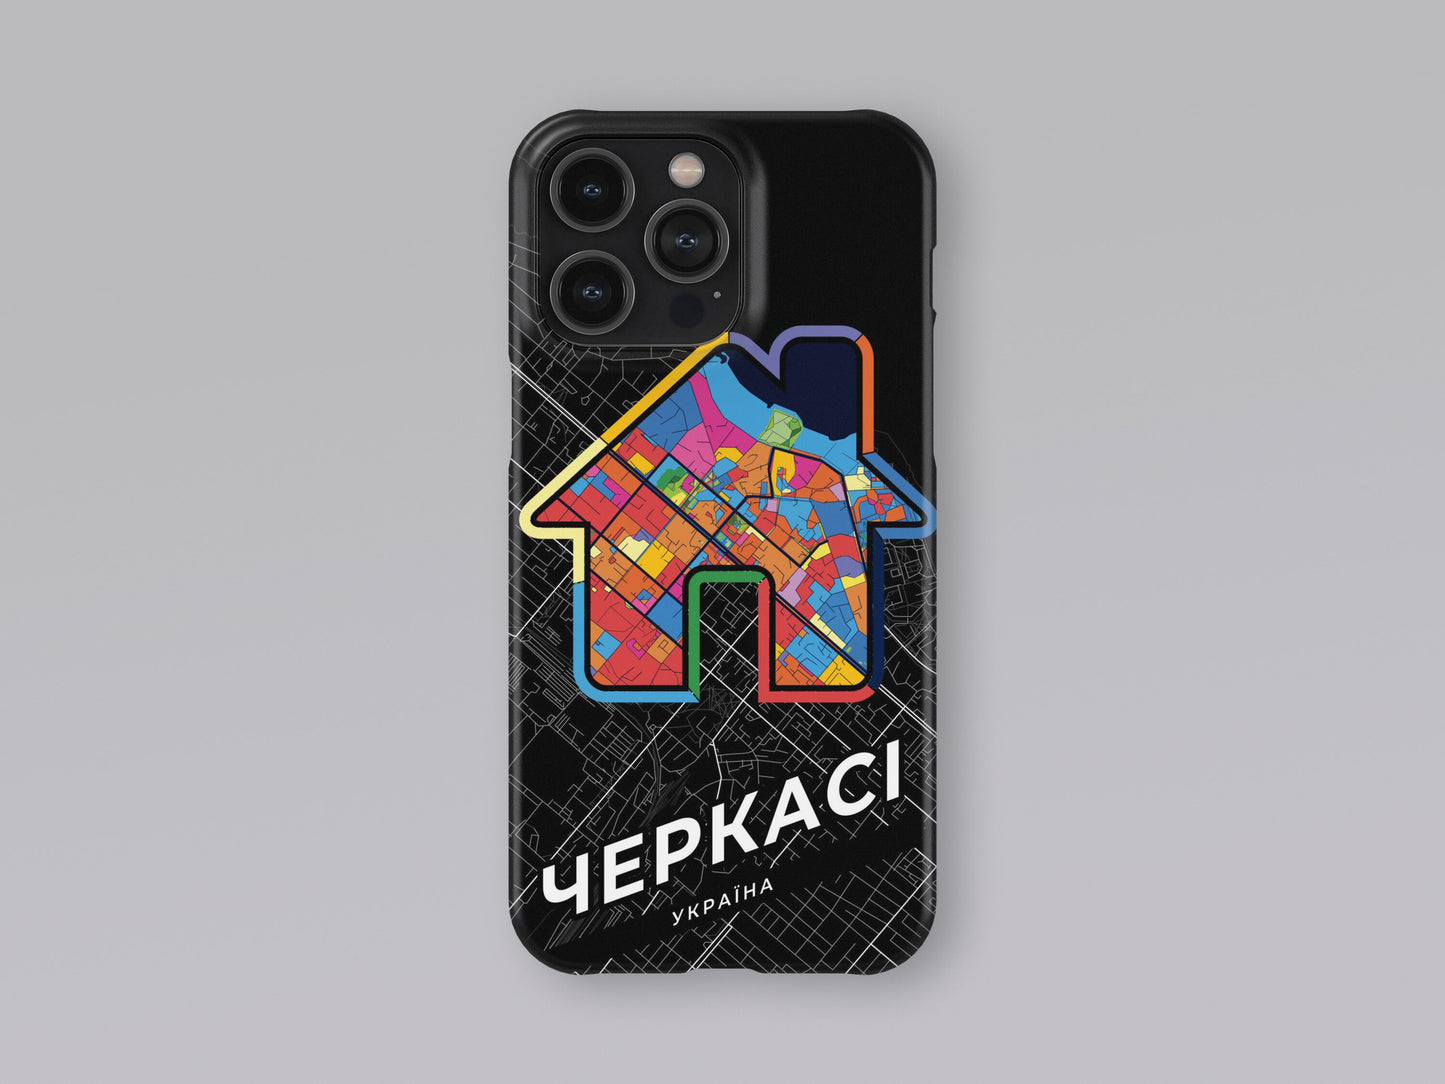 Cherkasy Ukraine slim phone case with colorful icon. Birthday, wedding or housewarming gift. Couple match cases. 3